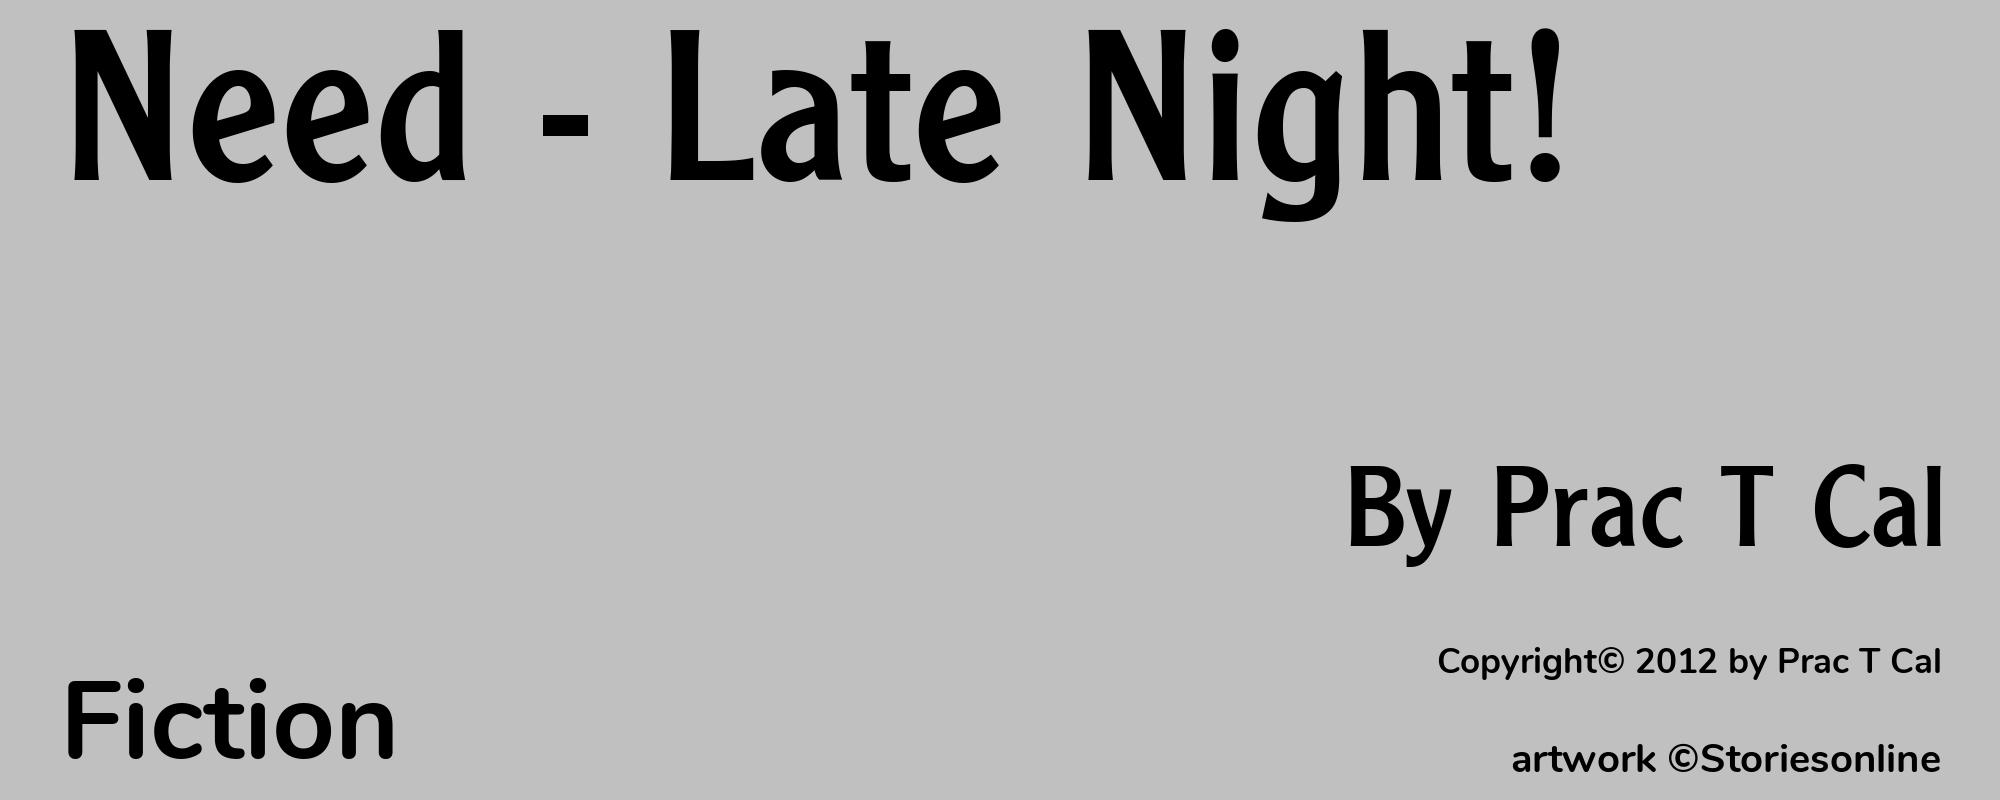 Need - Late Night! - Cover